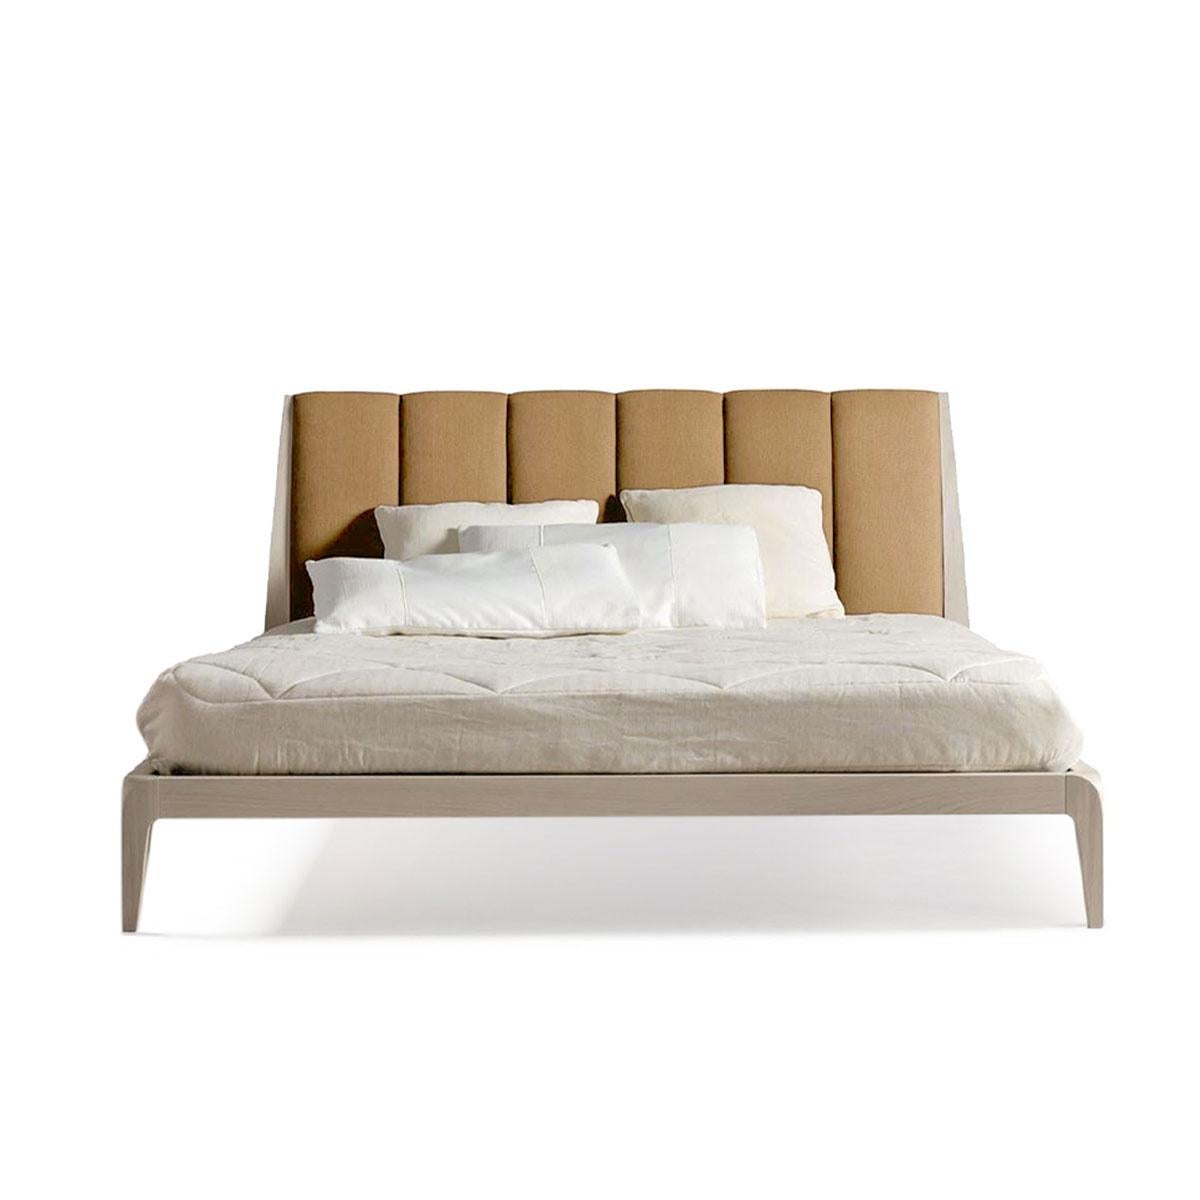 Modern Verso nord Solid Wood Bed, Walnut in Hand-Made Natural Grey Finish, Contemporary For Sale